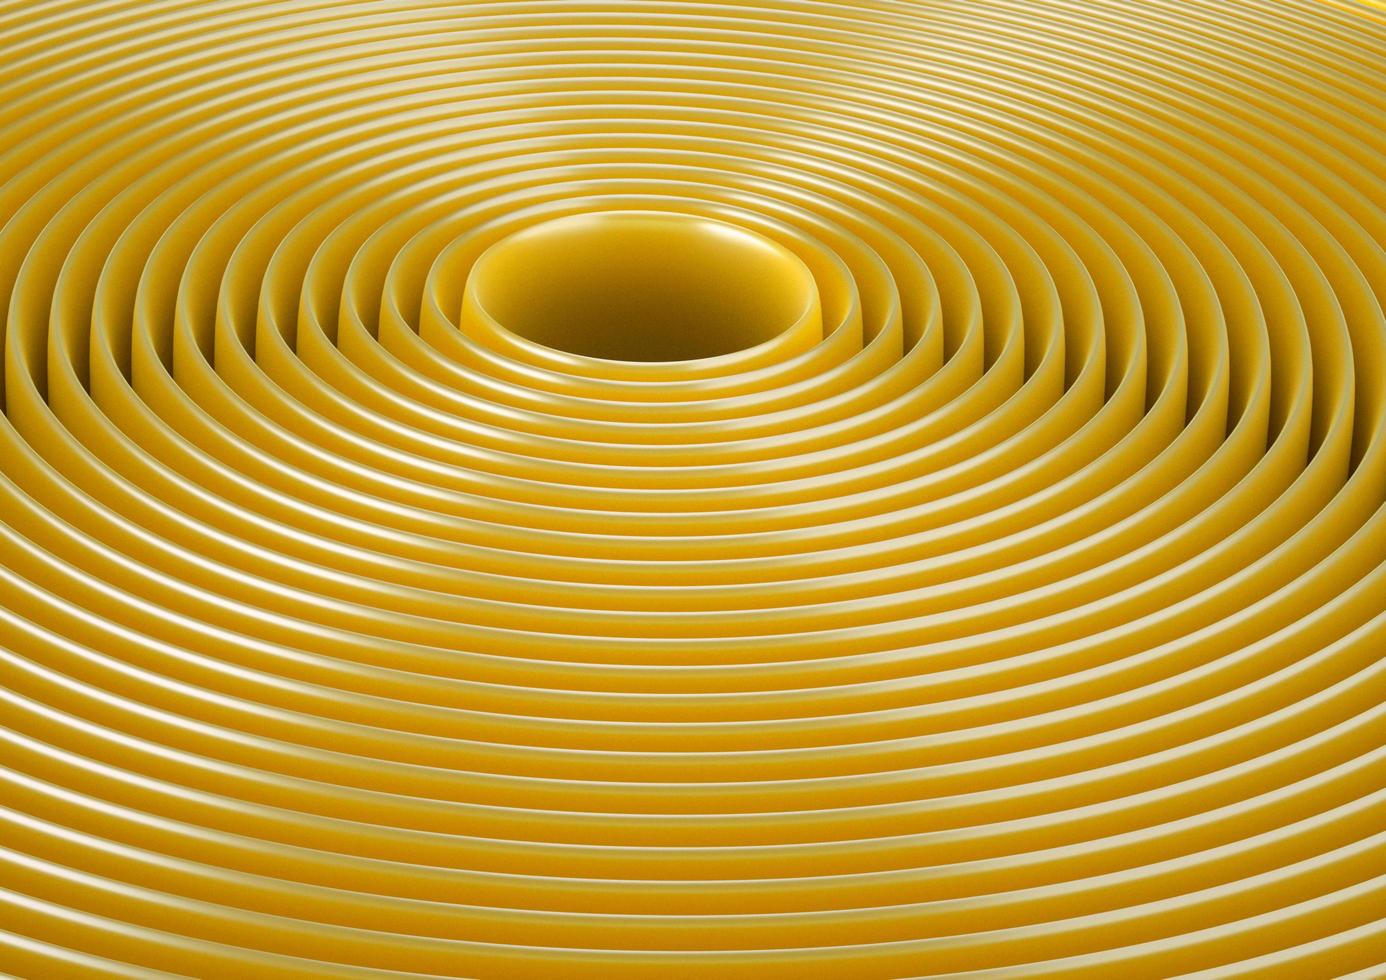 Abstract yellow round circles background 3d render photo